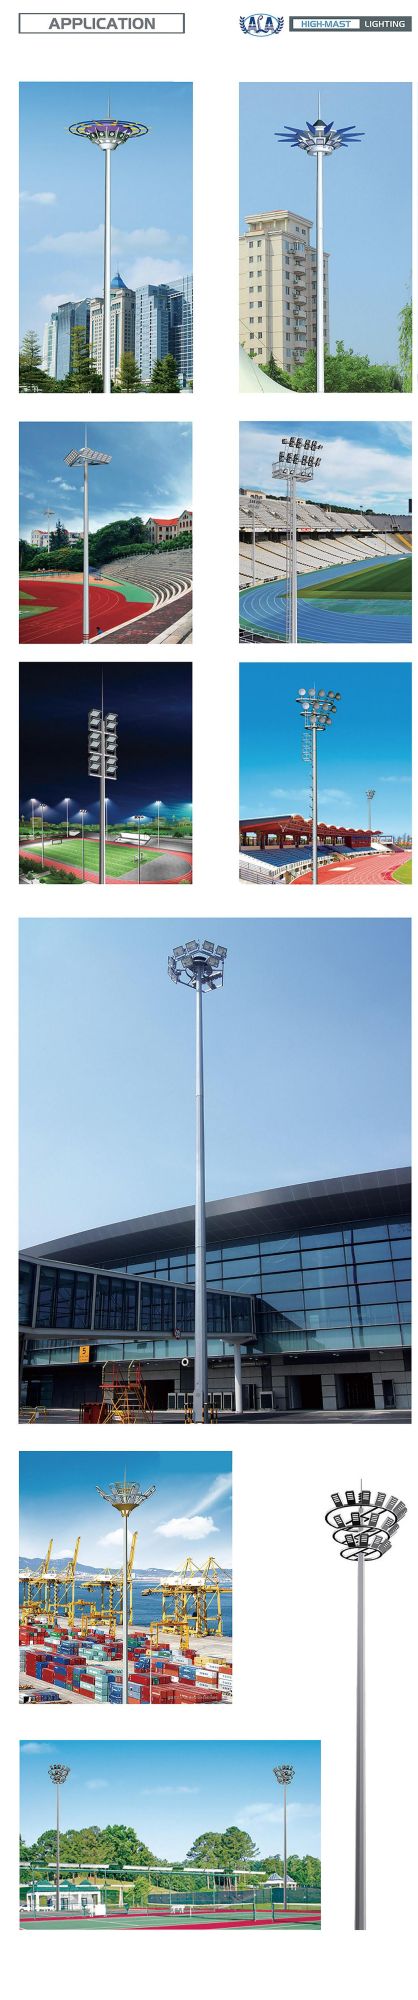 Ala 500W Airport Stadium High Mast Lamp with Raising and Lowering Device